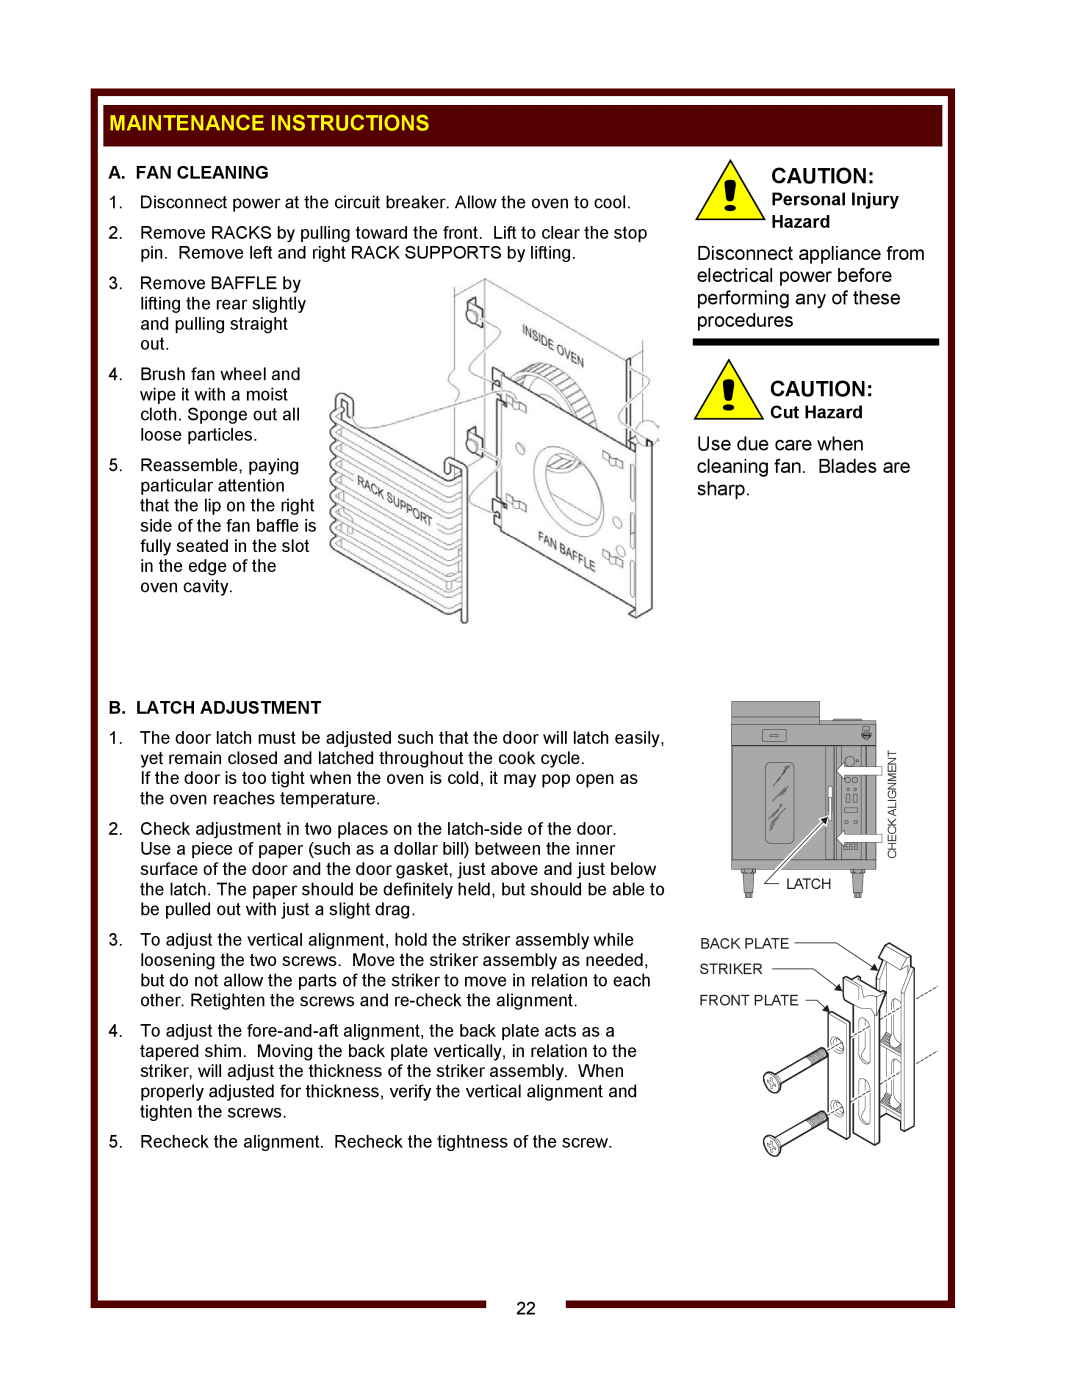 Wells WVOC-4HS Maintenance Instructions, Use due care when cleaning fan. Blades are sharp, A. Fan Cleaning, Cut Hazard 